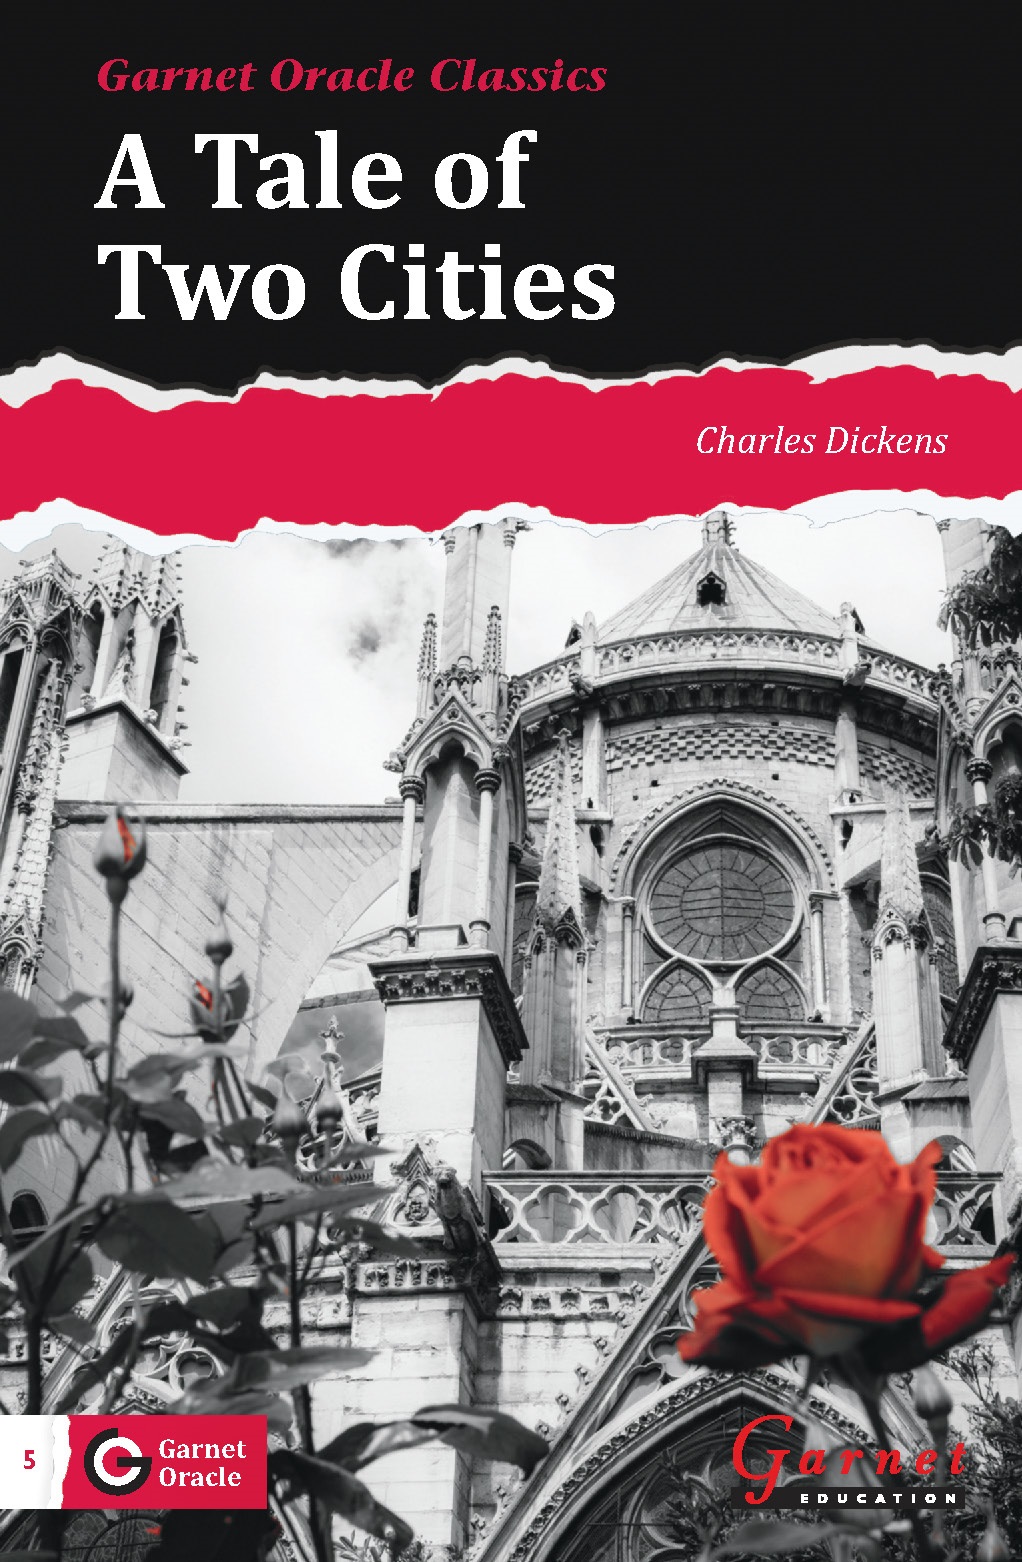 book review on a tale of two cities